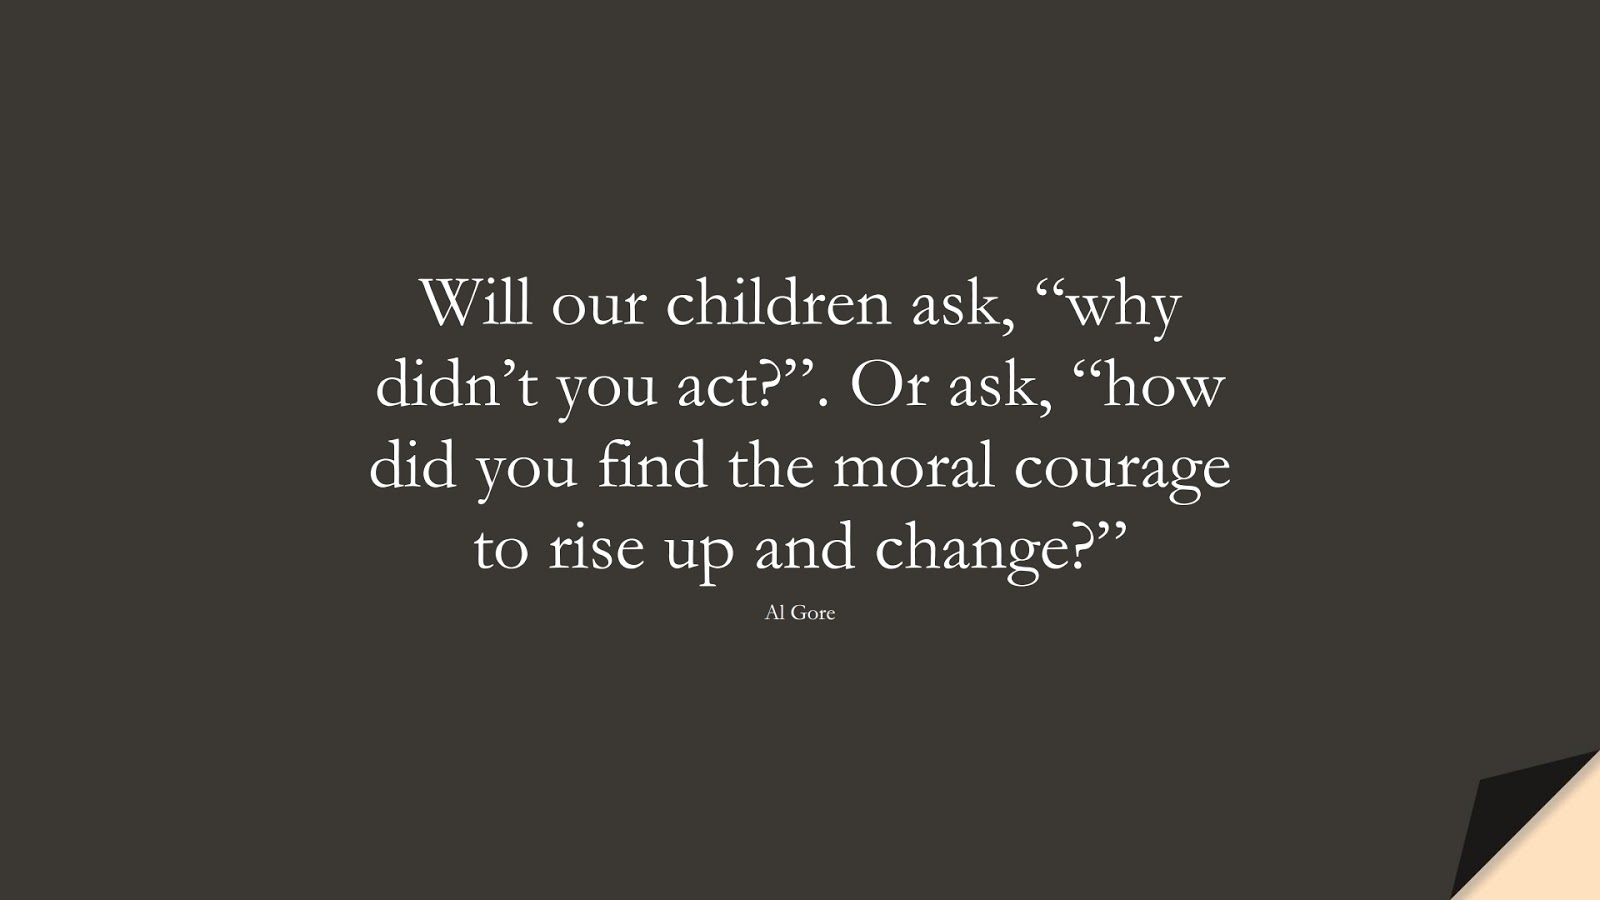 Will our children ask, “why didn’t you act?”. Or ask, “how did you find the moral courage to rise up and change?” (Al Gore);  #FamousQuotes